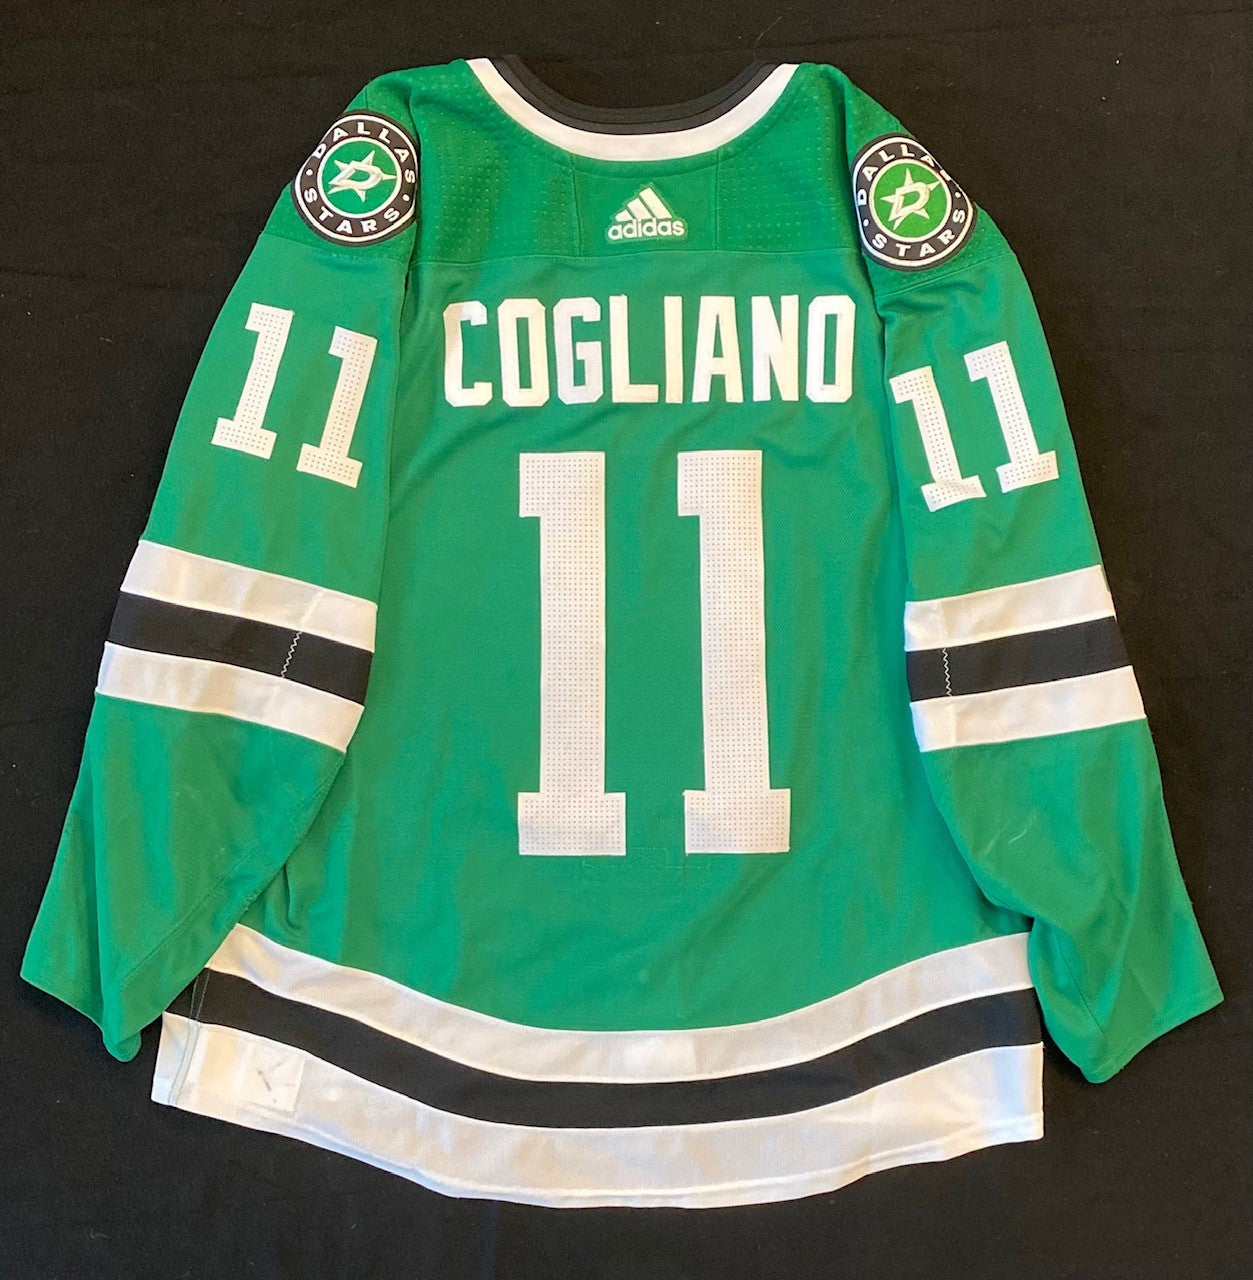 Andrew Cogliano 20/21 Home Set 1 Game Worn Jersey in Green - Back View